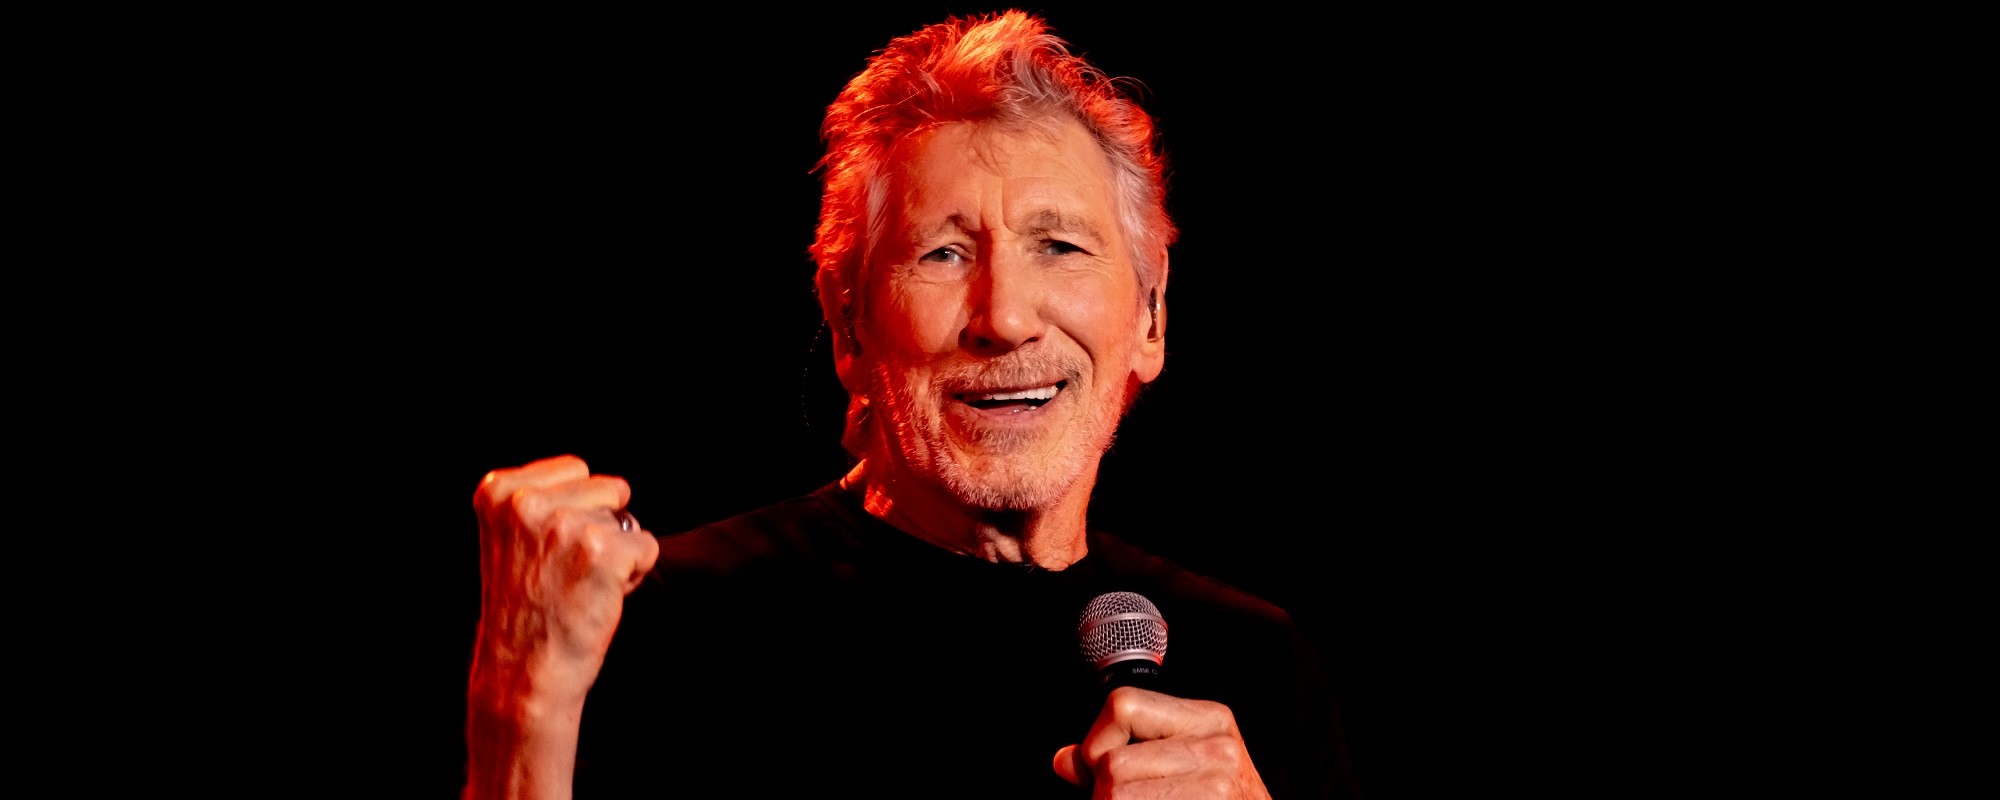 Roger Waters Reveals His Favorite Song to Play Live and His Most Difficult Concert Experiences